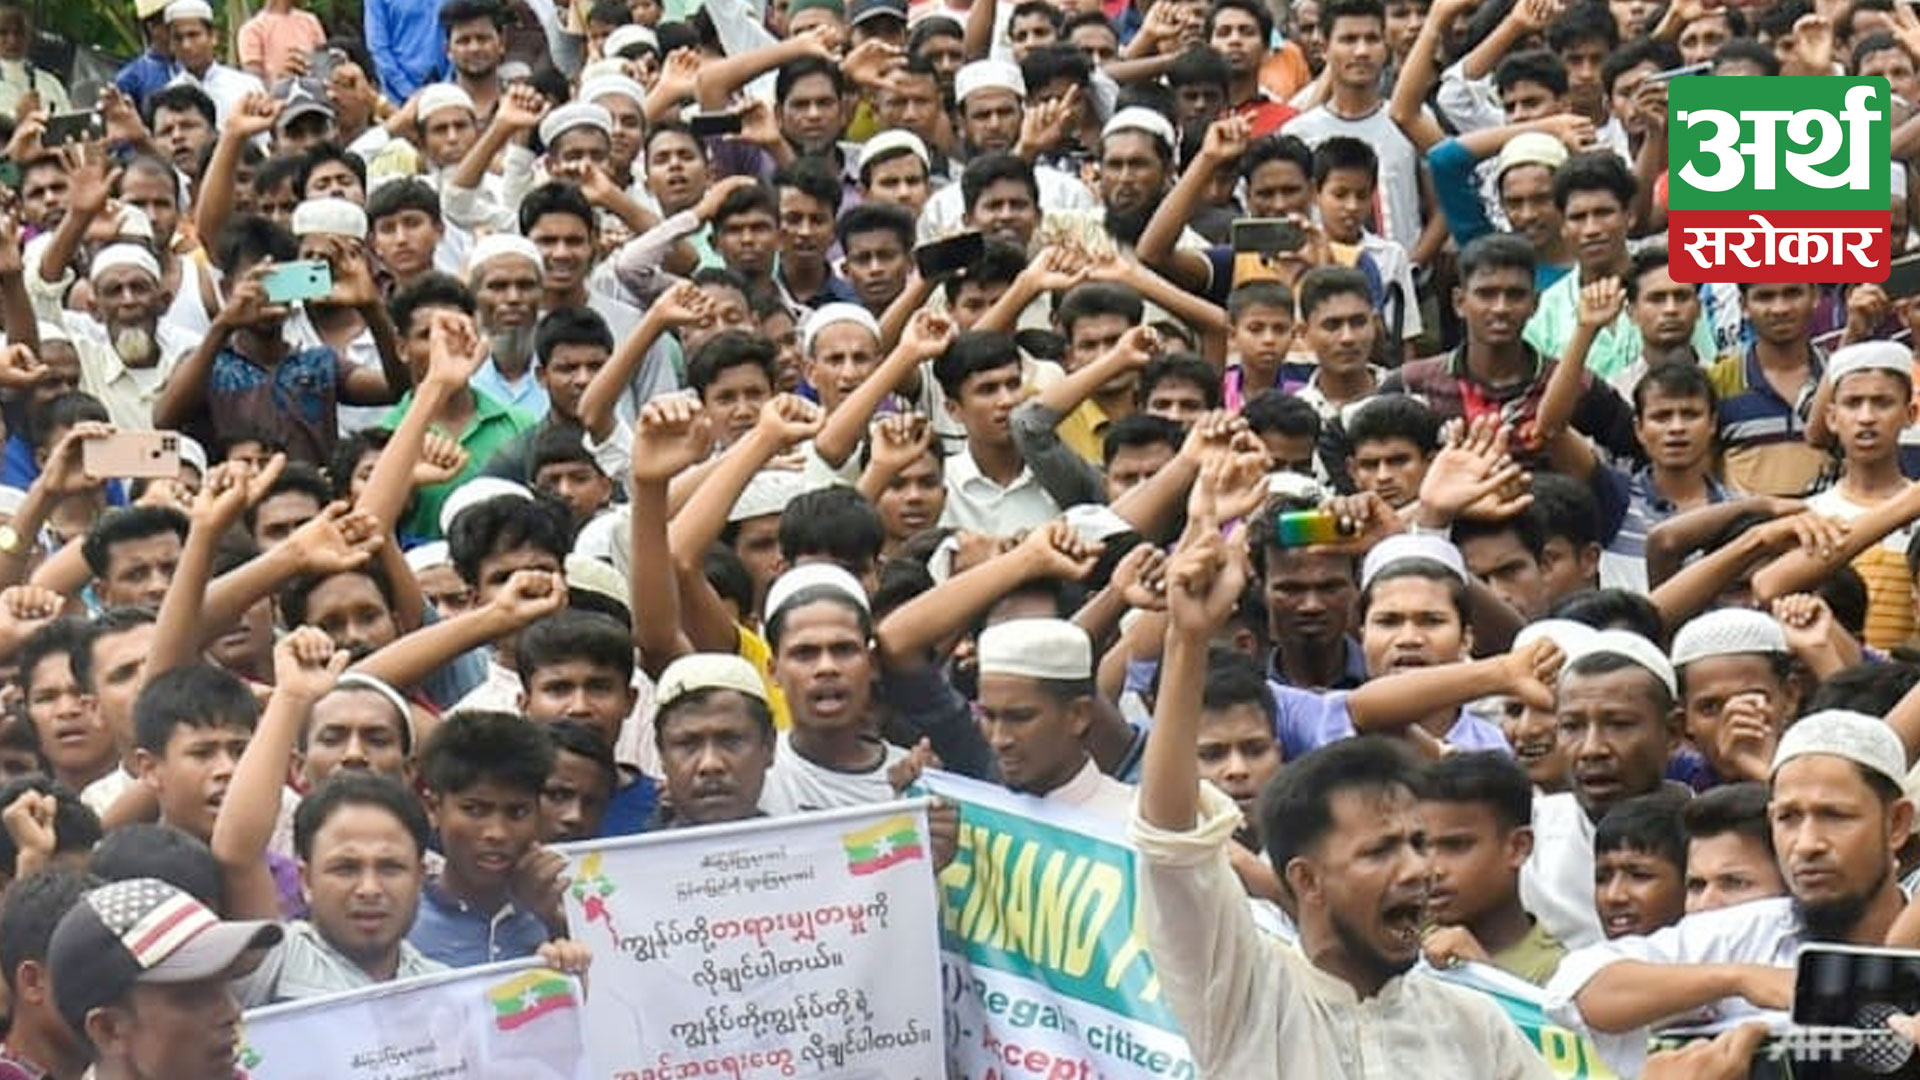 What message did Myanmar military get from the massive Rohingya rally ‘Go Home’ in Bangladesh ?